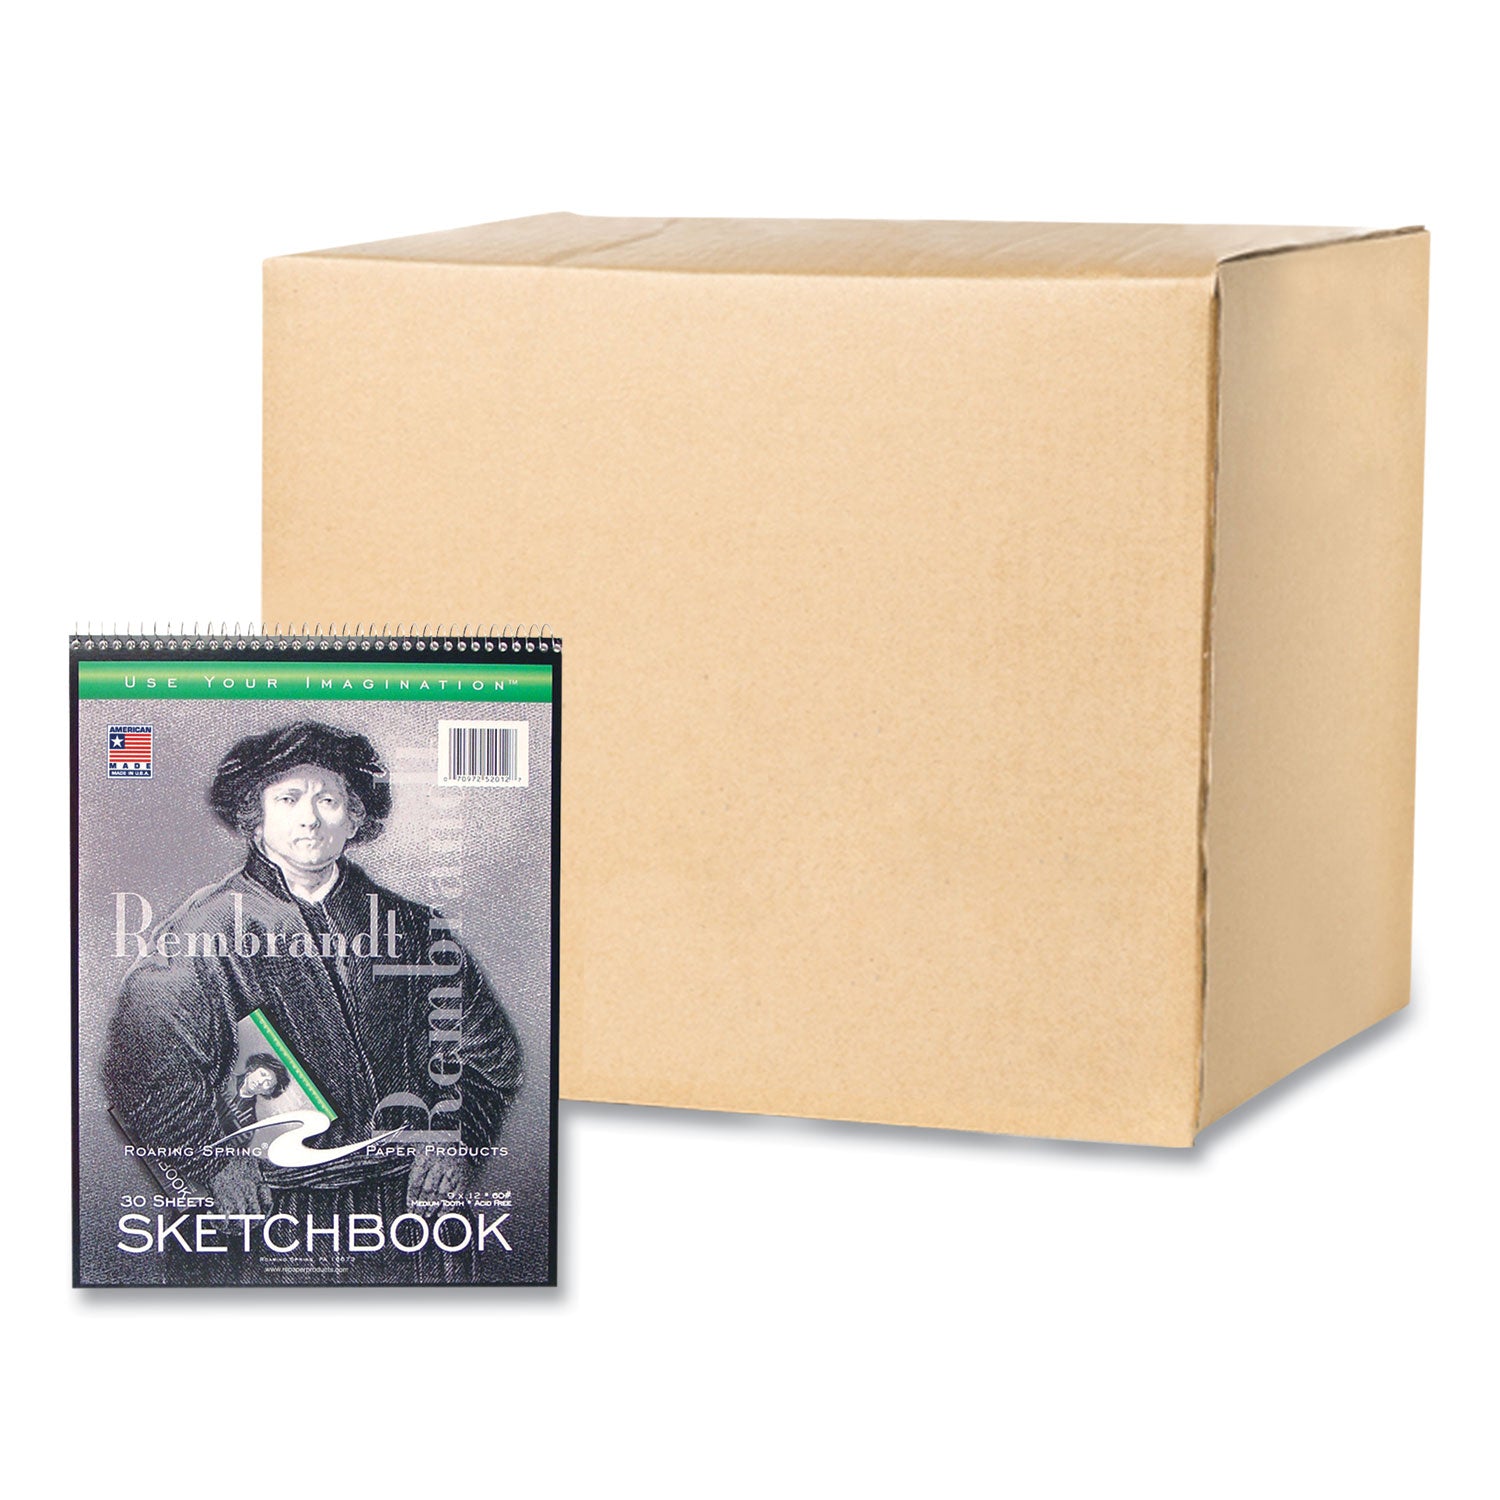 sketch-pad-unruled-rembrandt-photography-cover-30-9-x-12-sheets12-carton-ships-in-4-6-business-days_roa52112cs - 1